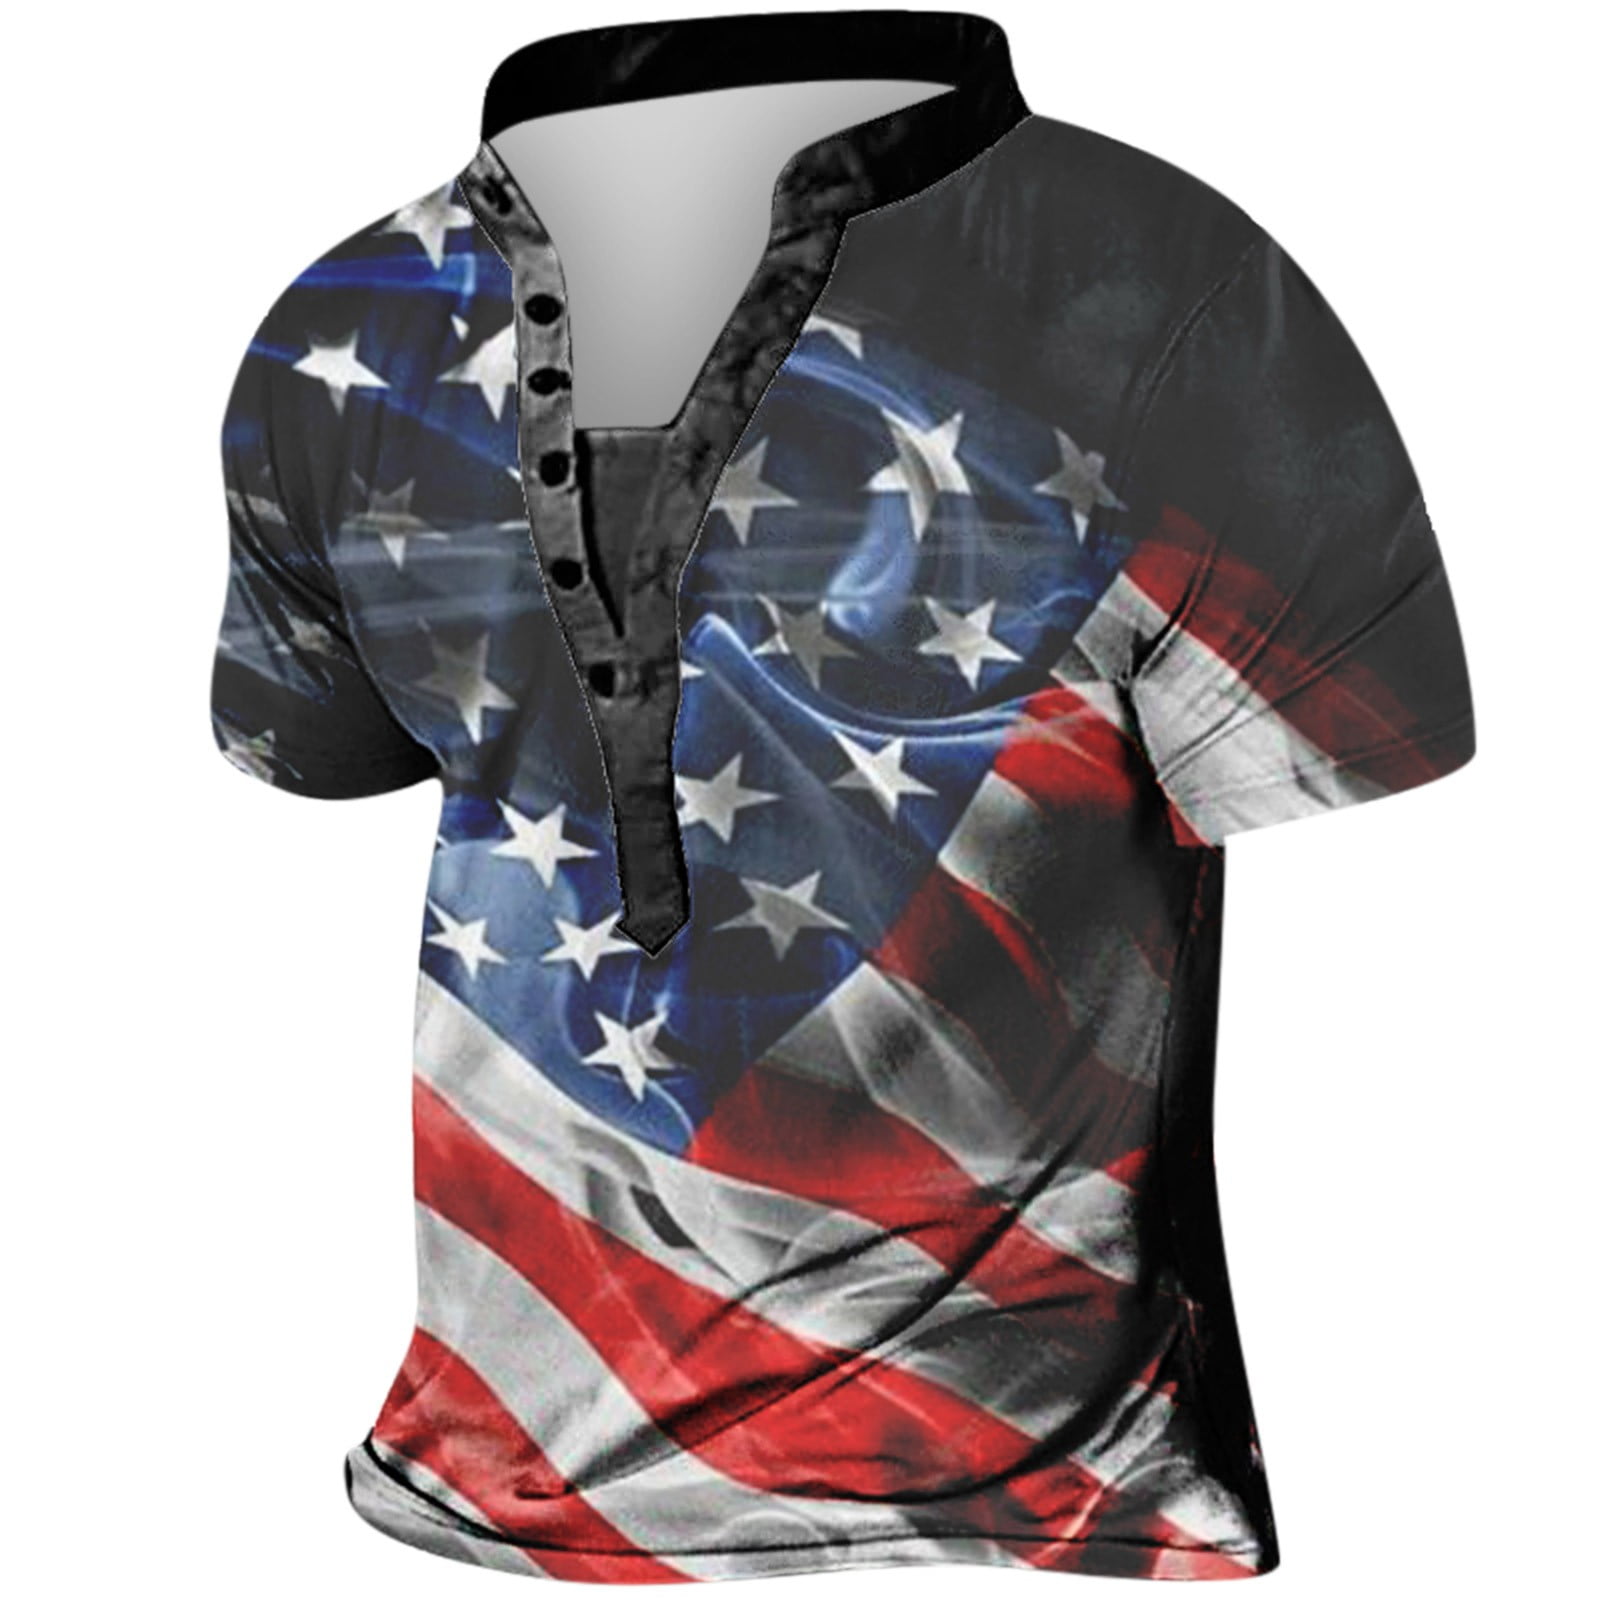 jsaierl 4th of July Shirts for Men Patriotic Stars and Stripes Graphic Tees  Lightweight Button Up Henley Top Streetwear Short Sleeve T Shirt 